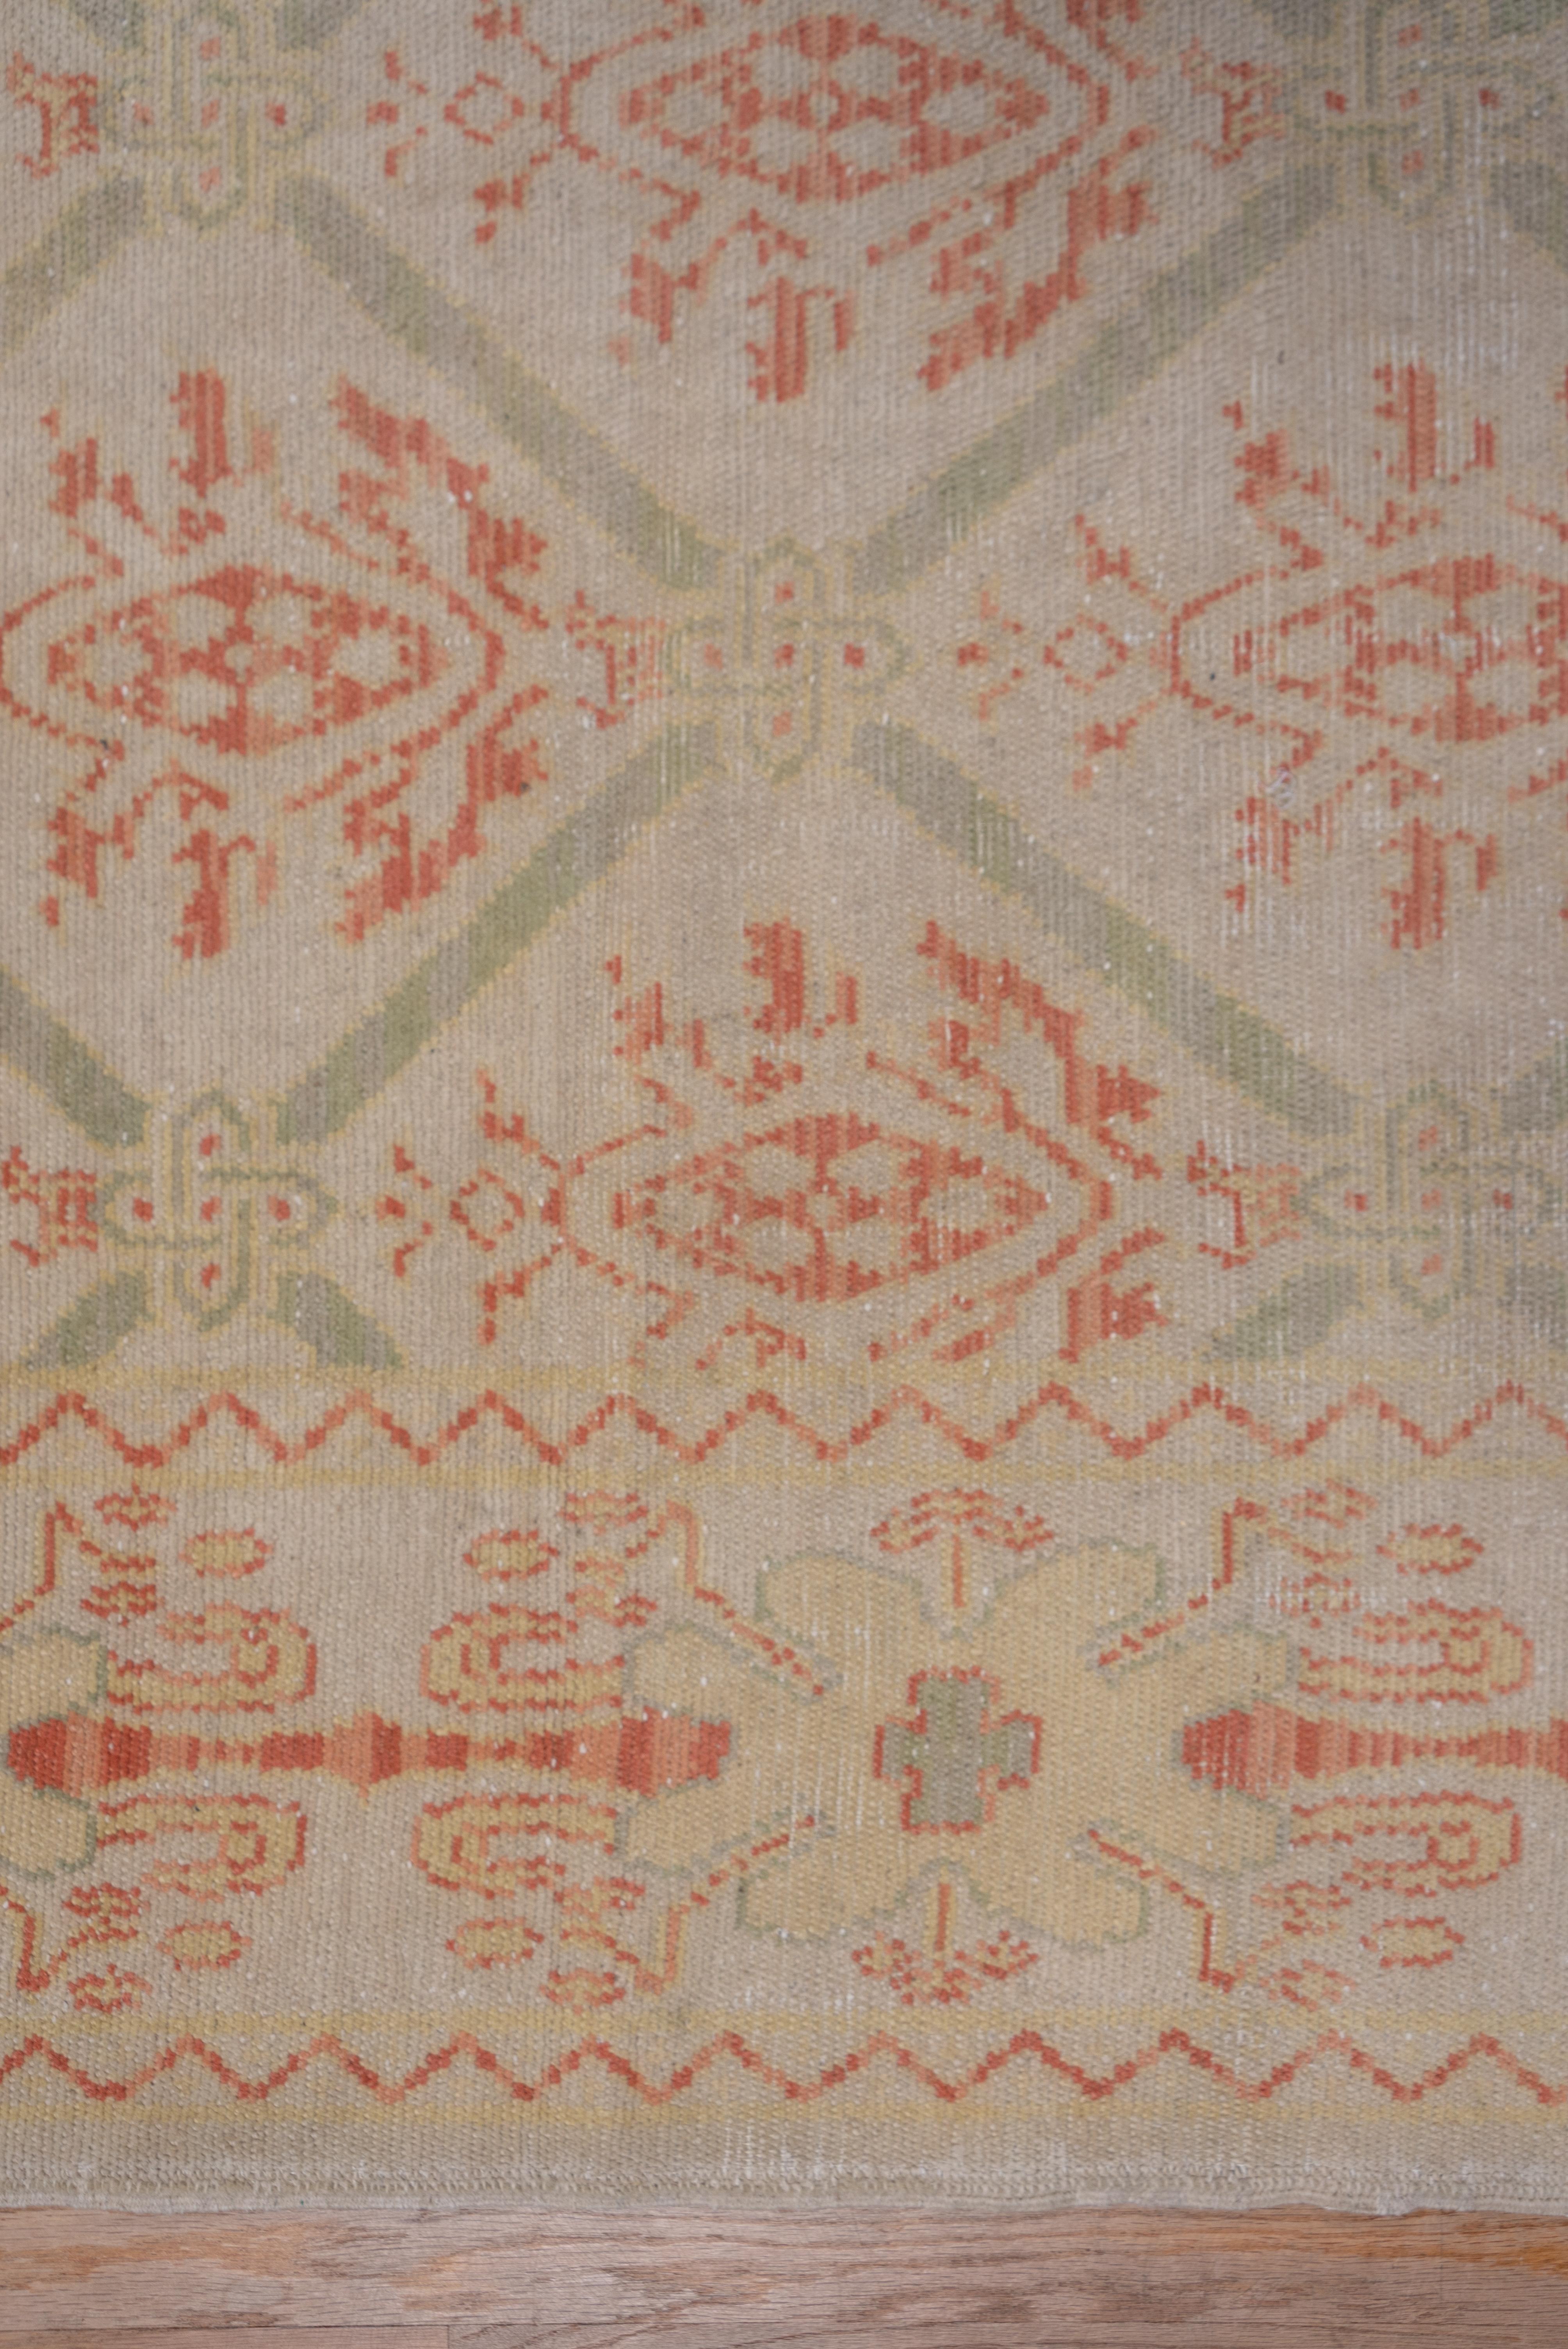 The sandy beige field shows an all-over one-way textile pattern of pomegranate palmettes enclosed by a lozenge lattice. Zig-zags mark out the main border with its knobby baton ornament. Rust is the most important detail tone.